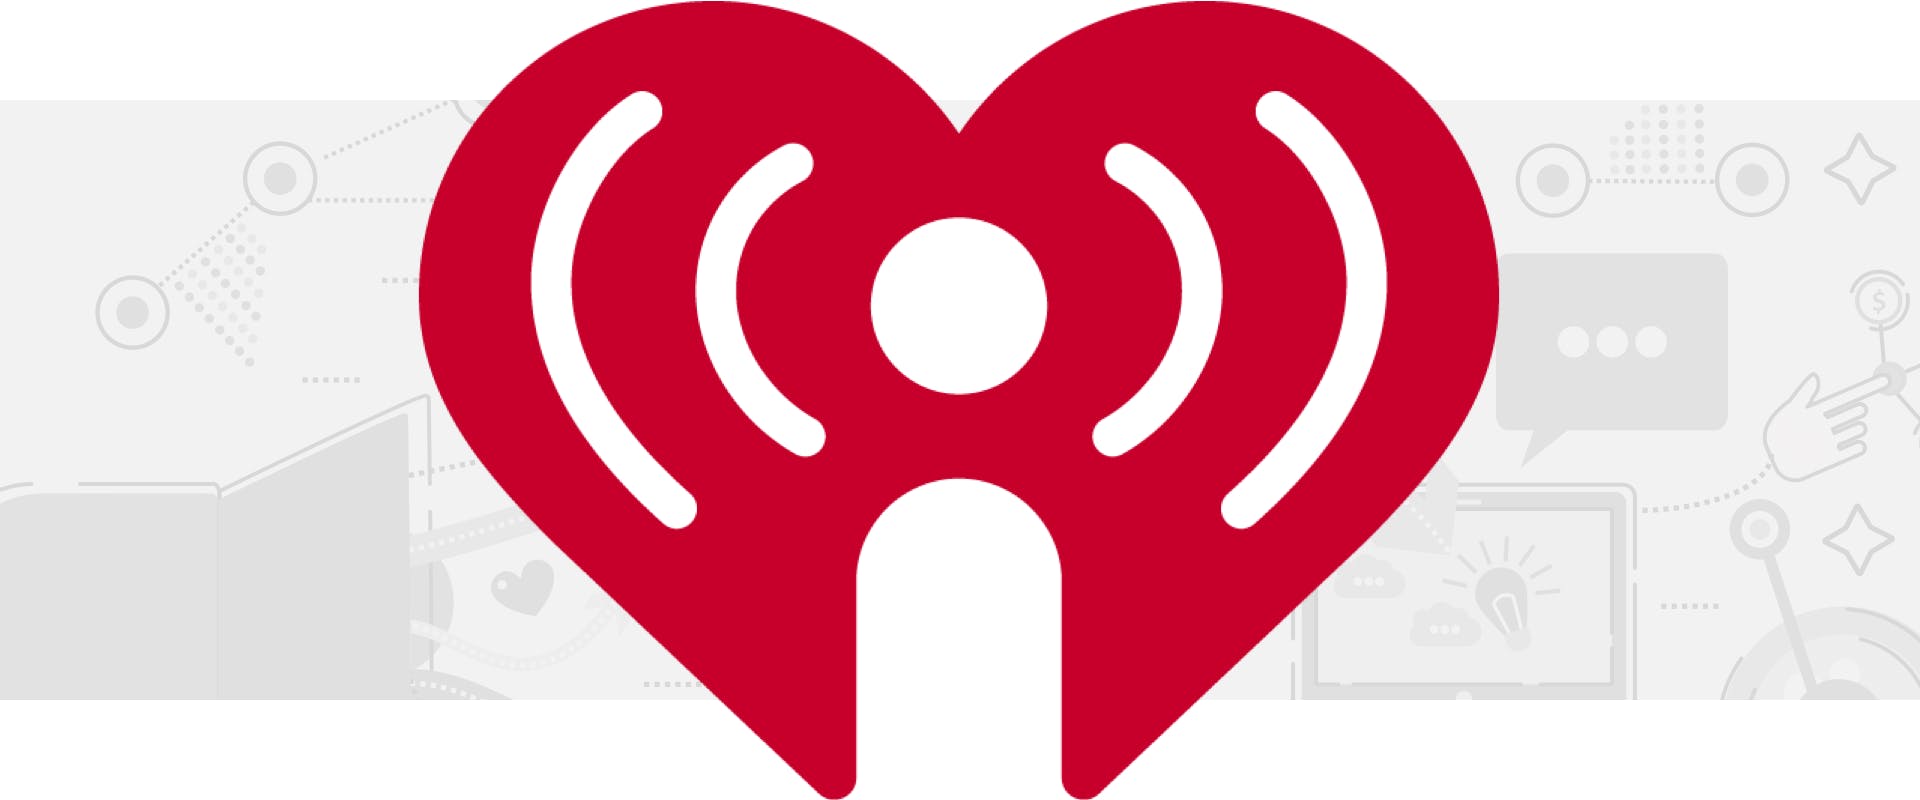 Submit Your Podcast To Iheartradio In 4 Steps